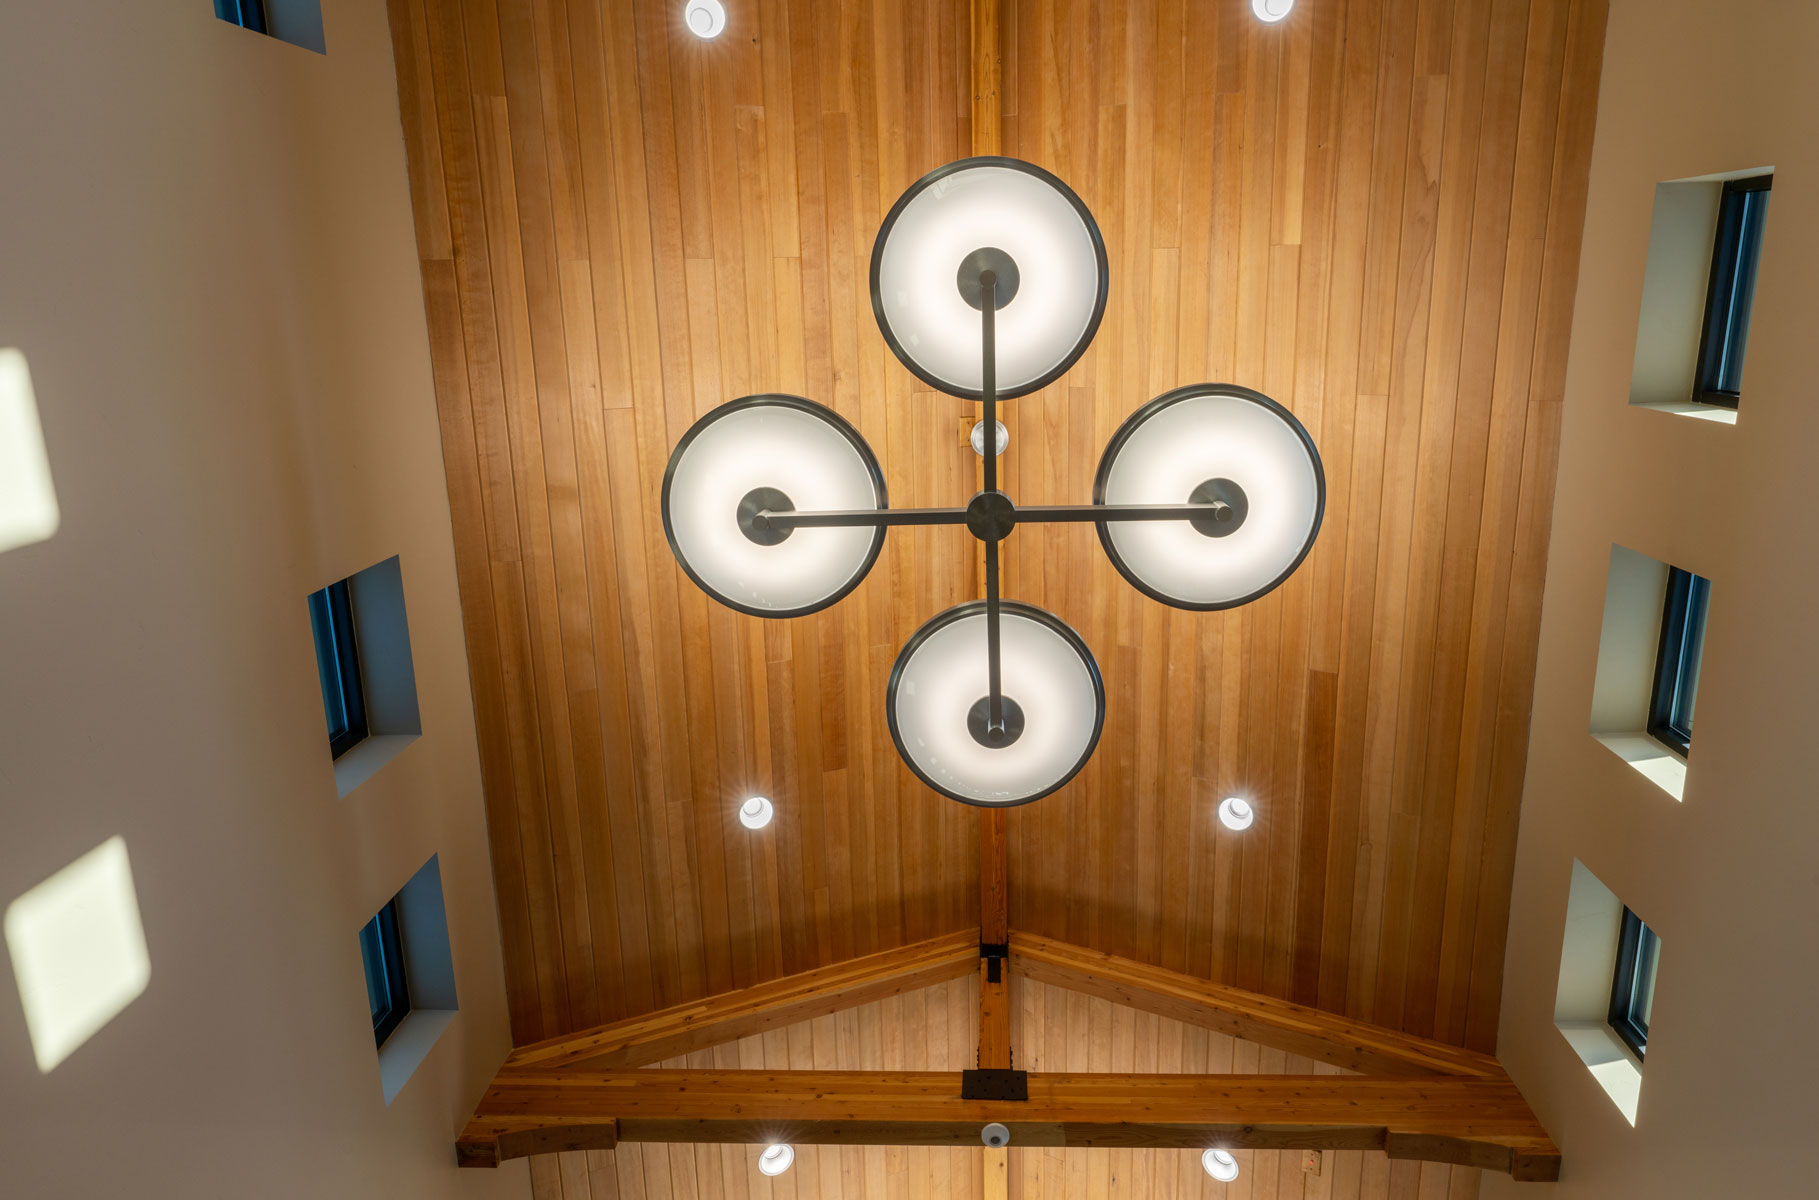 sierra-central-credit-union-chico-branch-ceiling